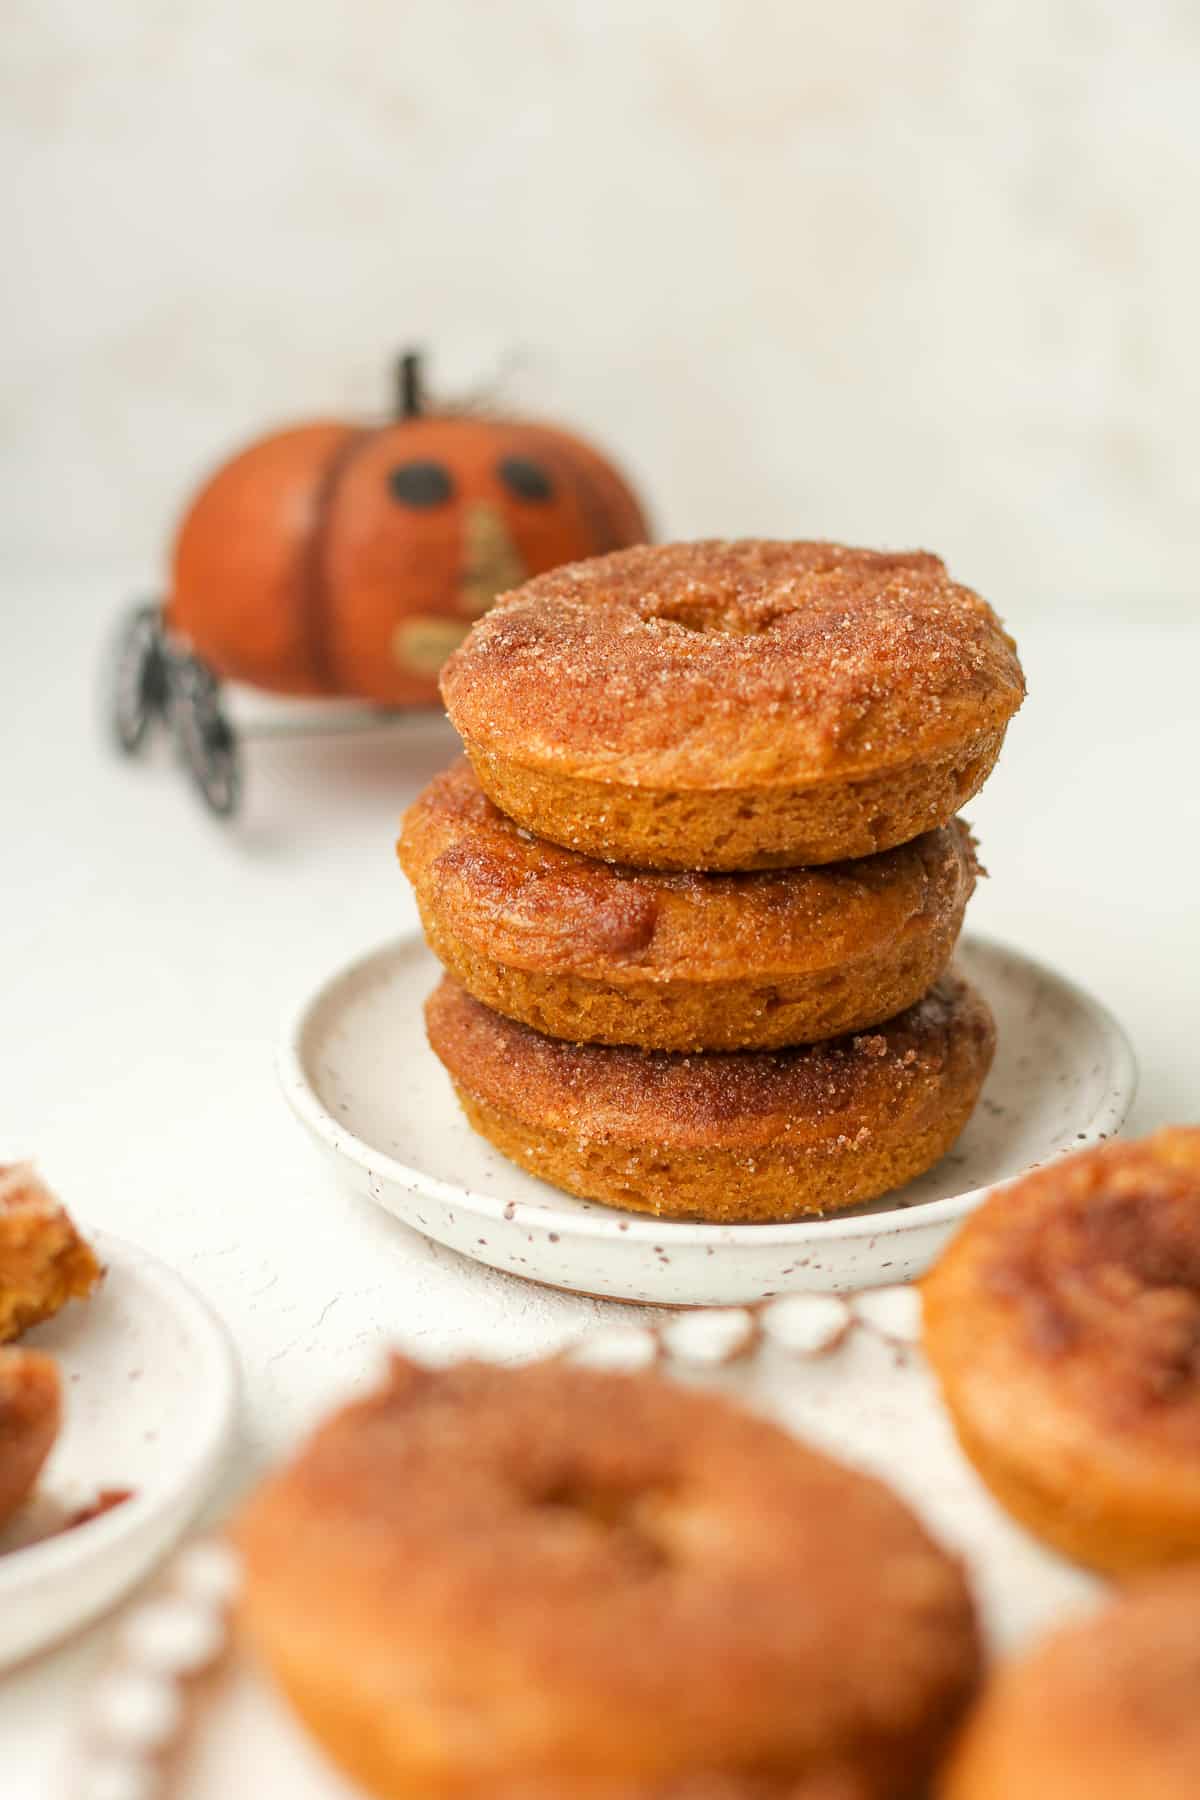 A small plate with three pumpkin donuts with cinnamon sugar topping.